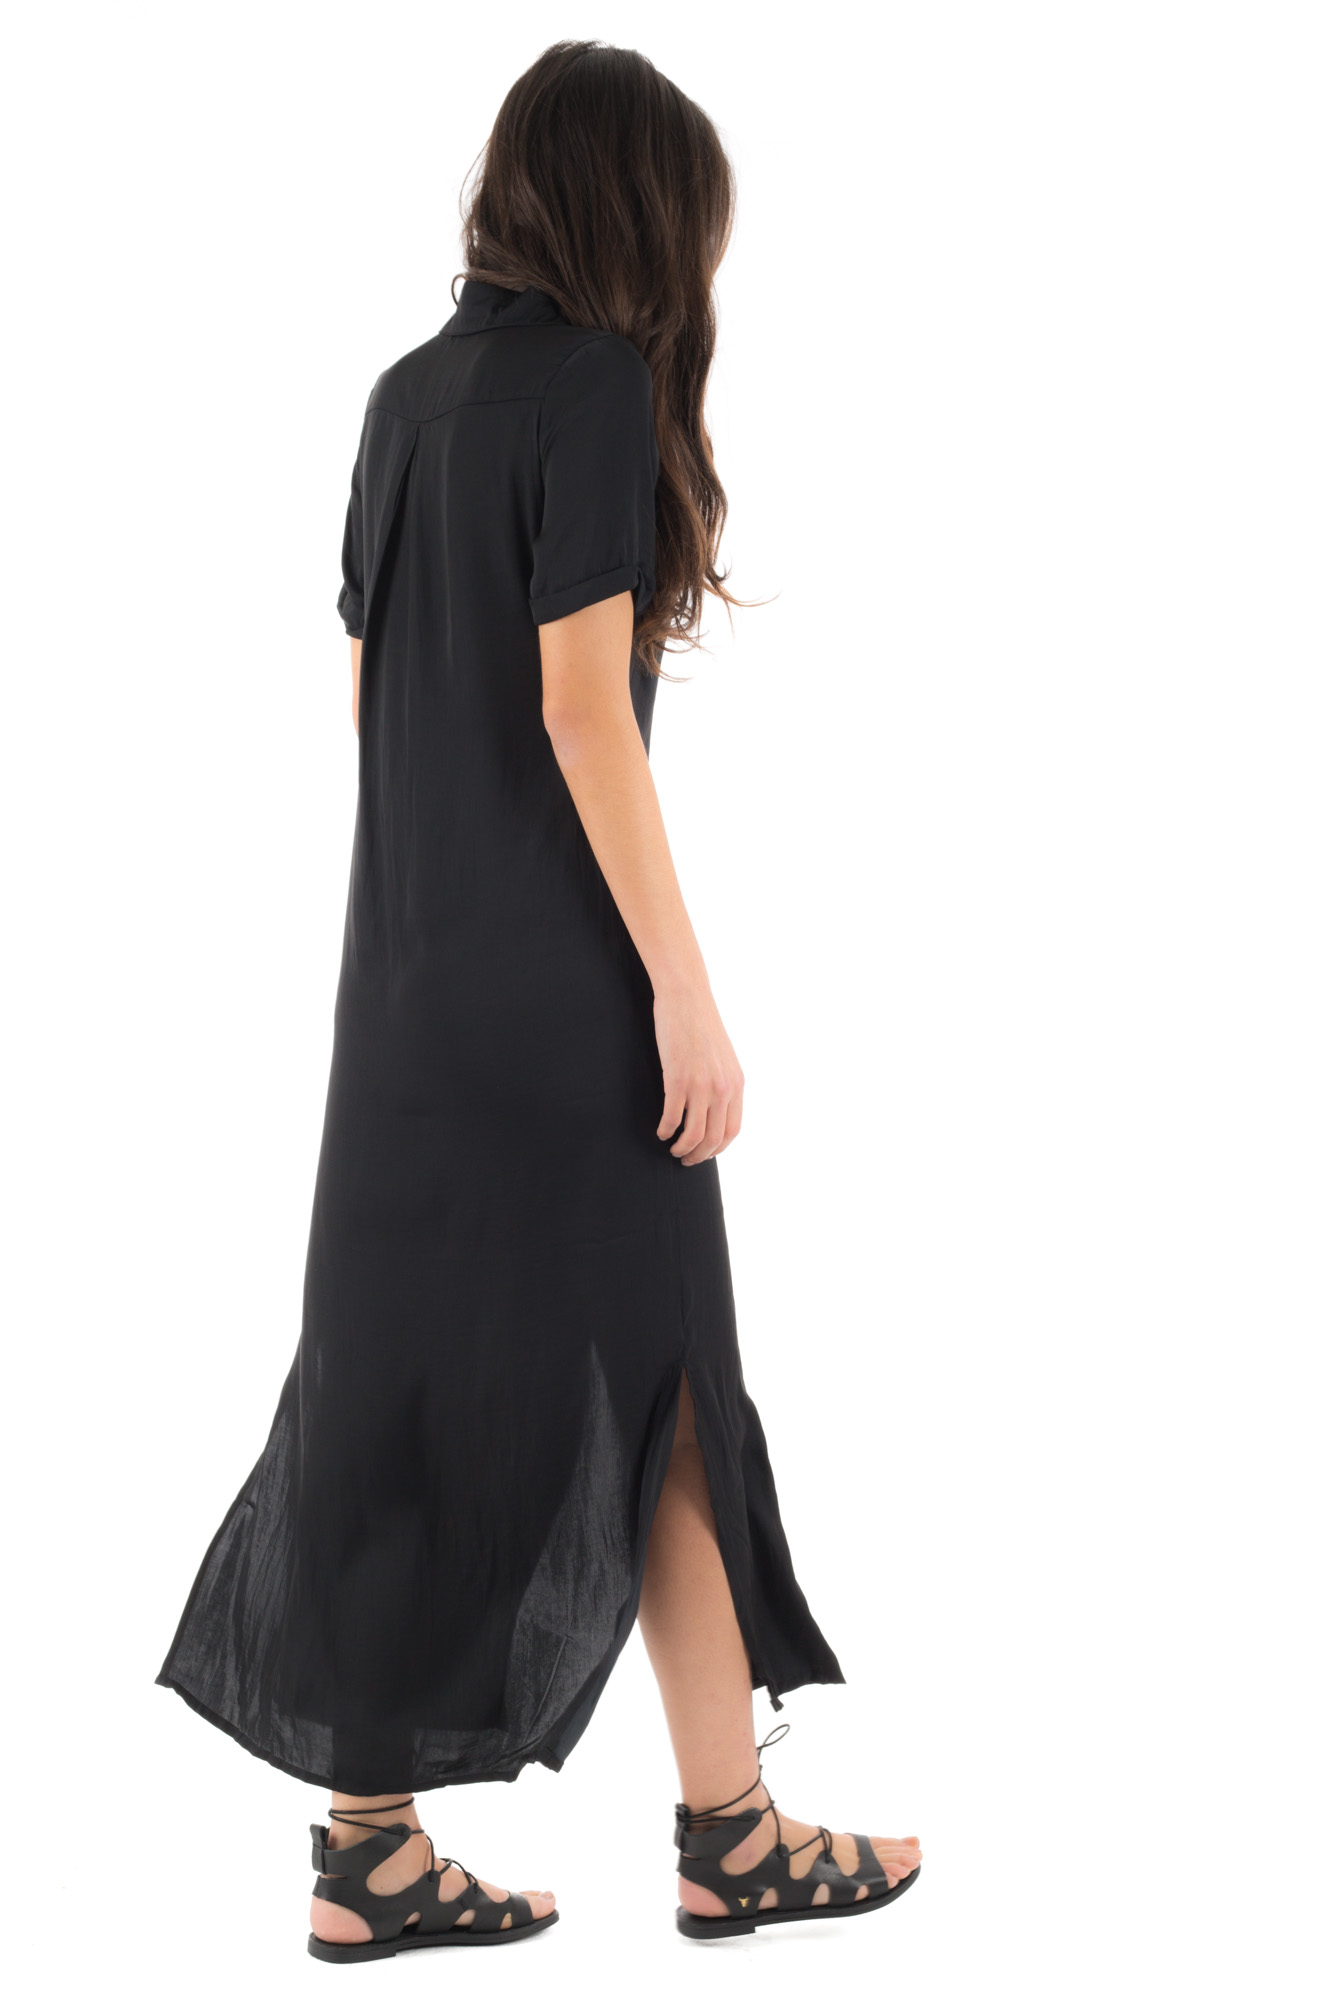 Glamorous - Long black dress with front buttons